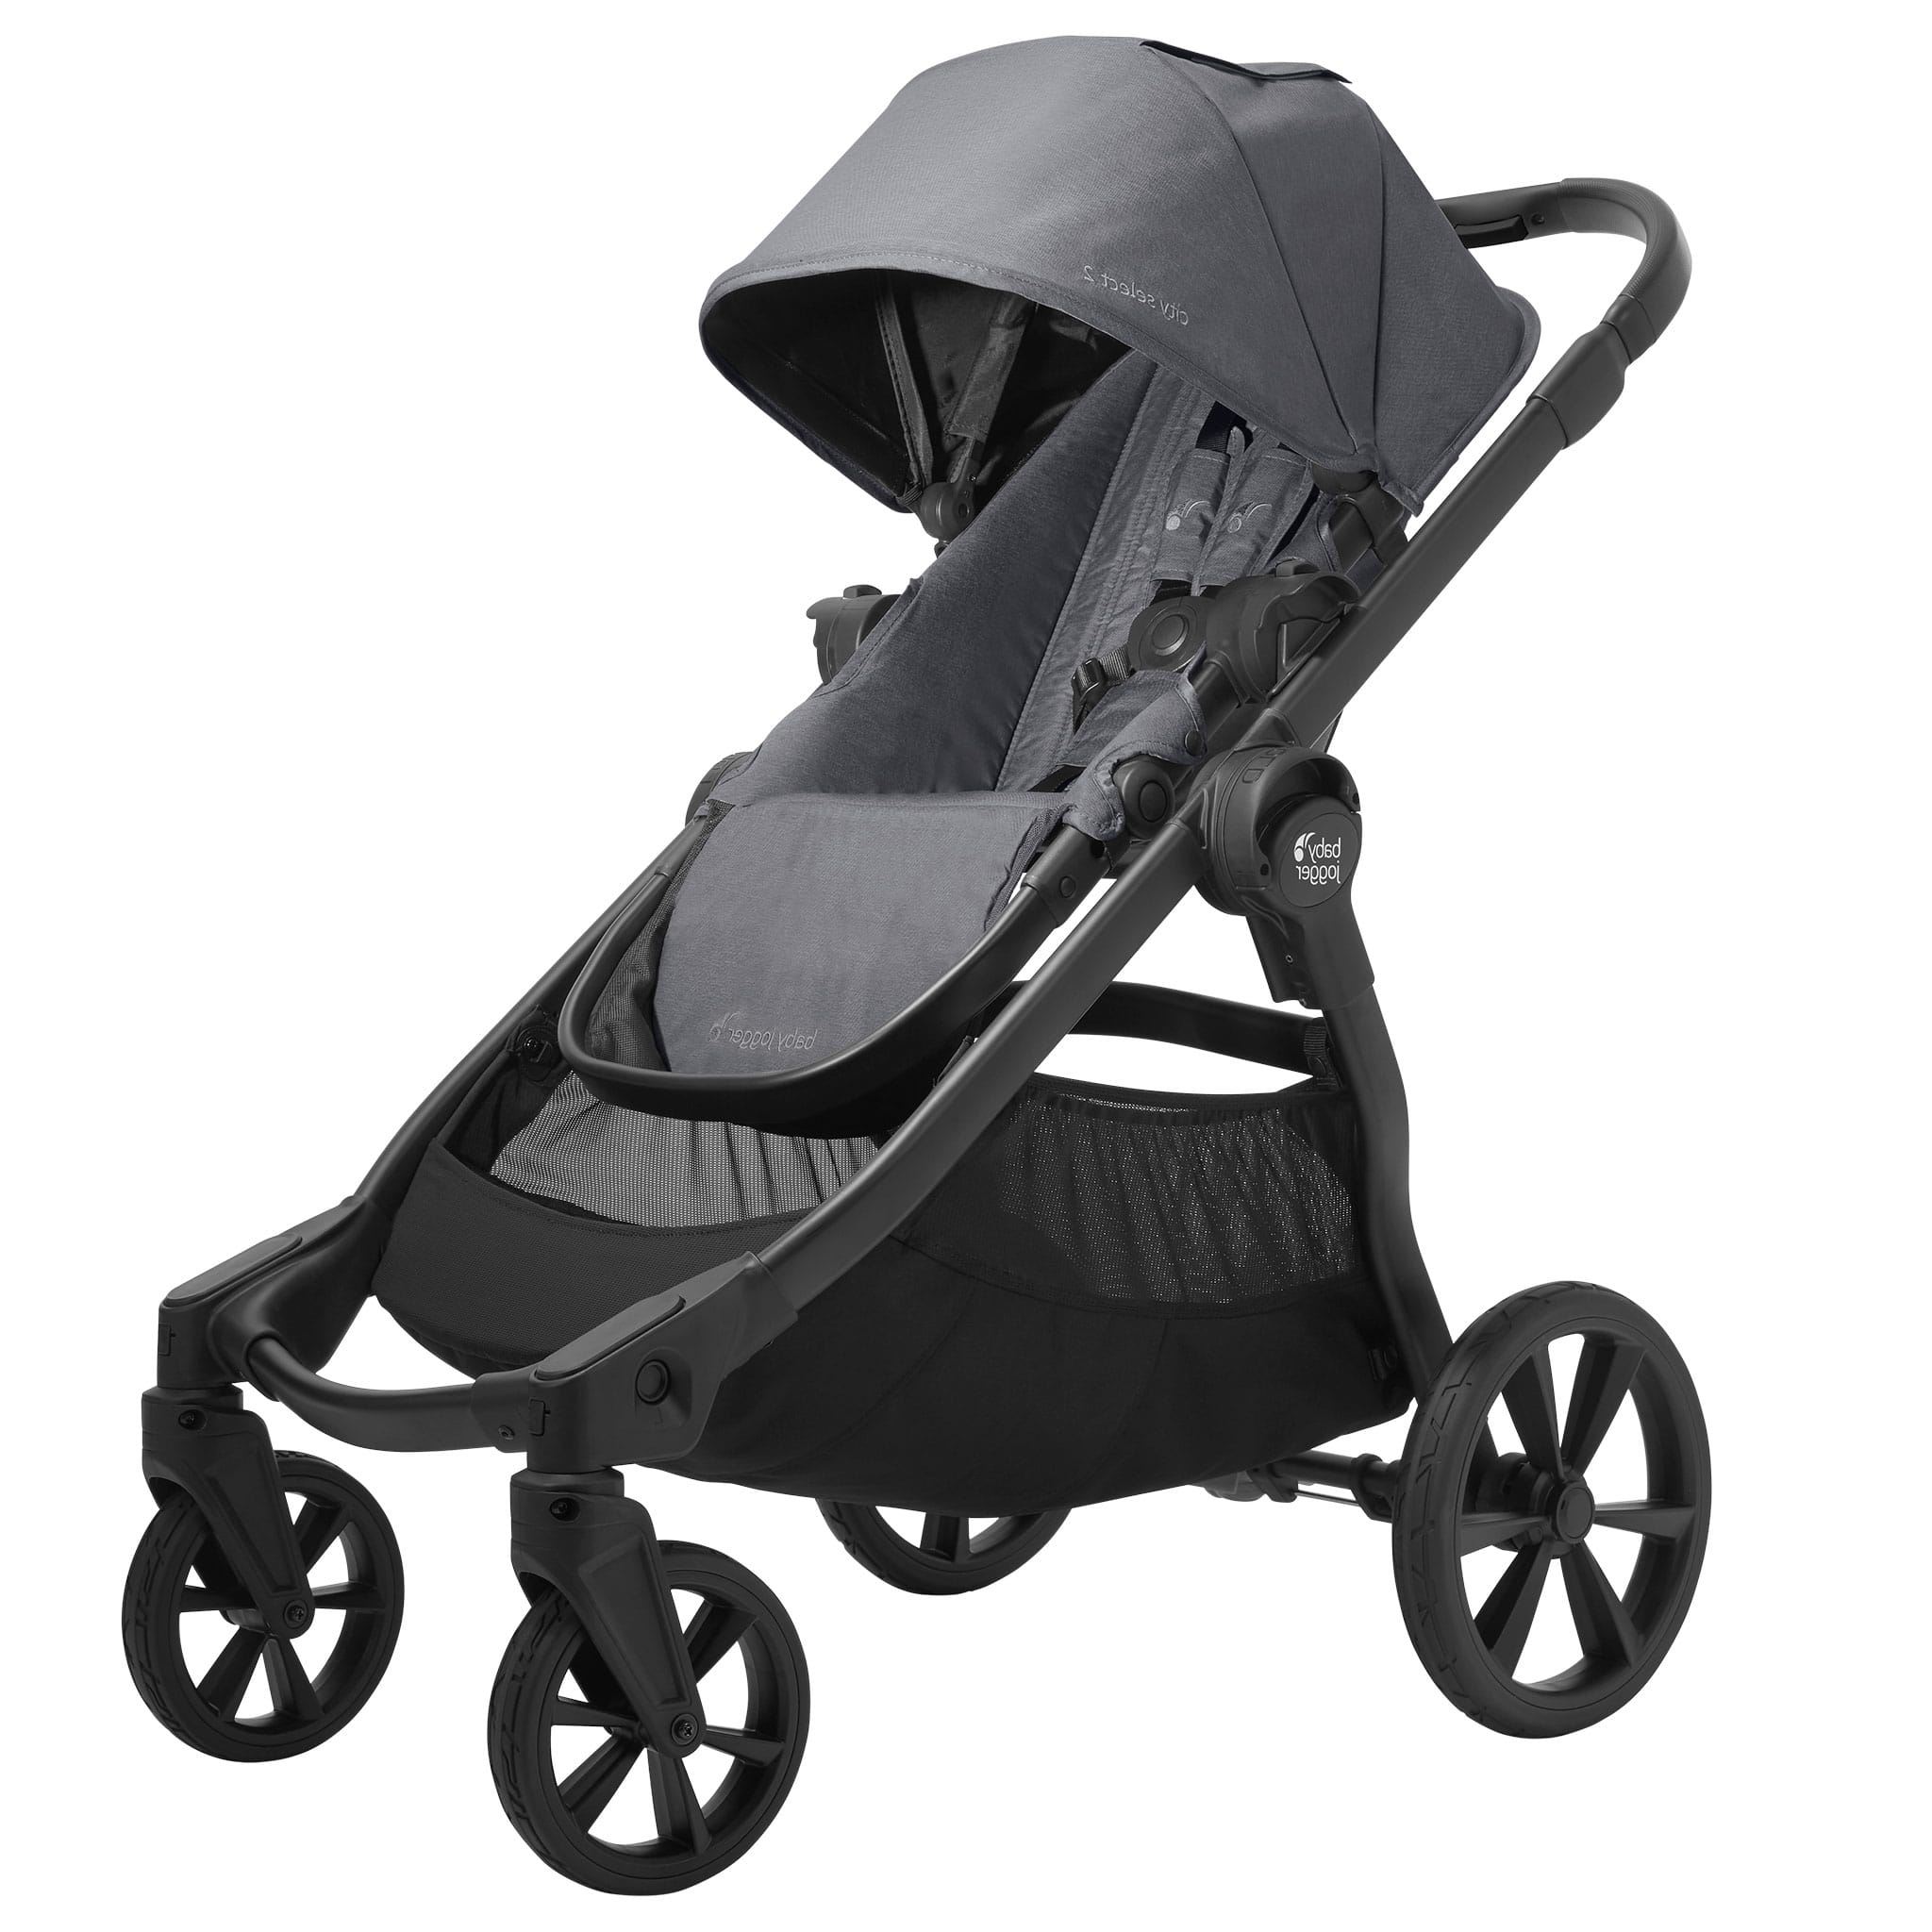 Baby Jogger: City Select 2 stroller